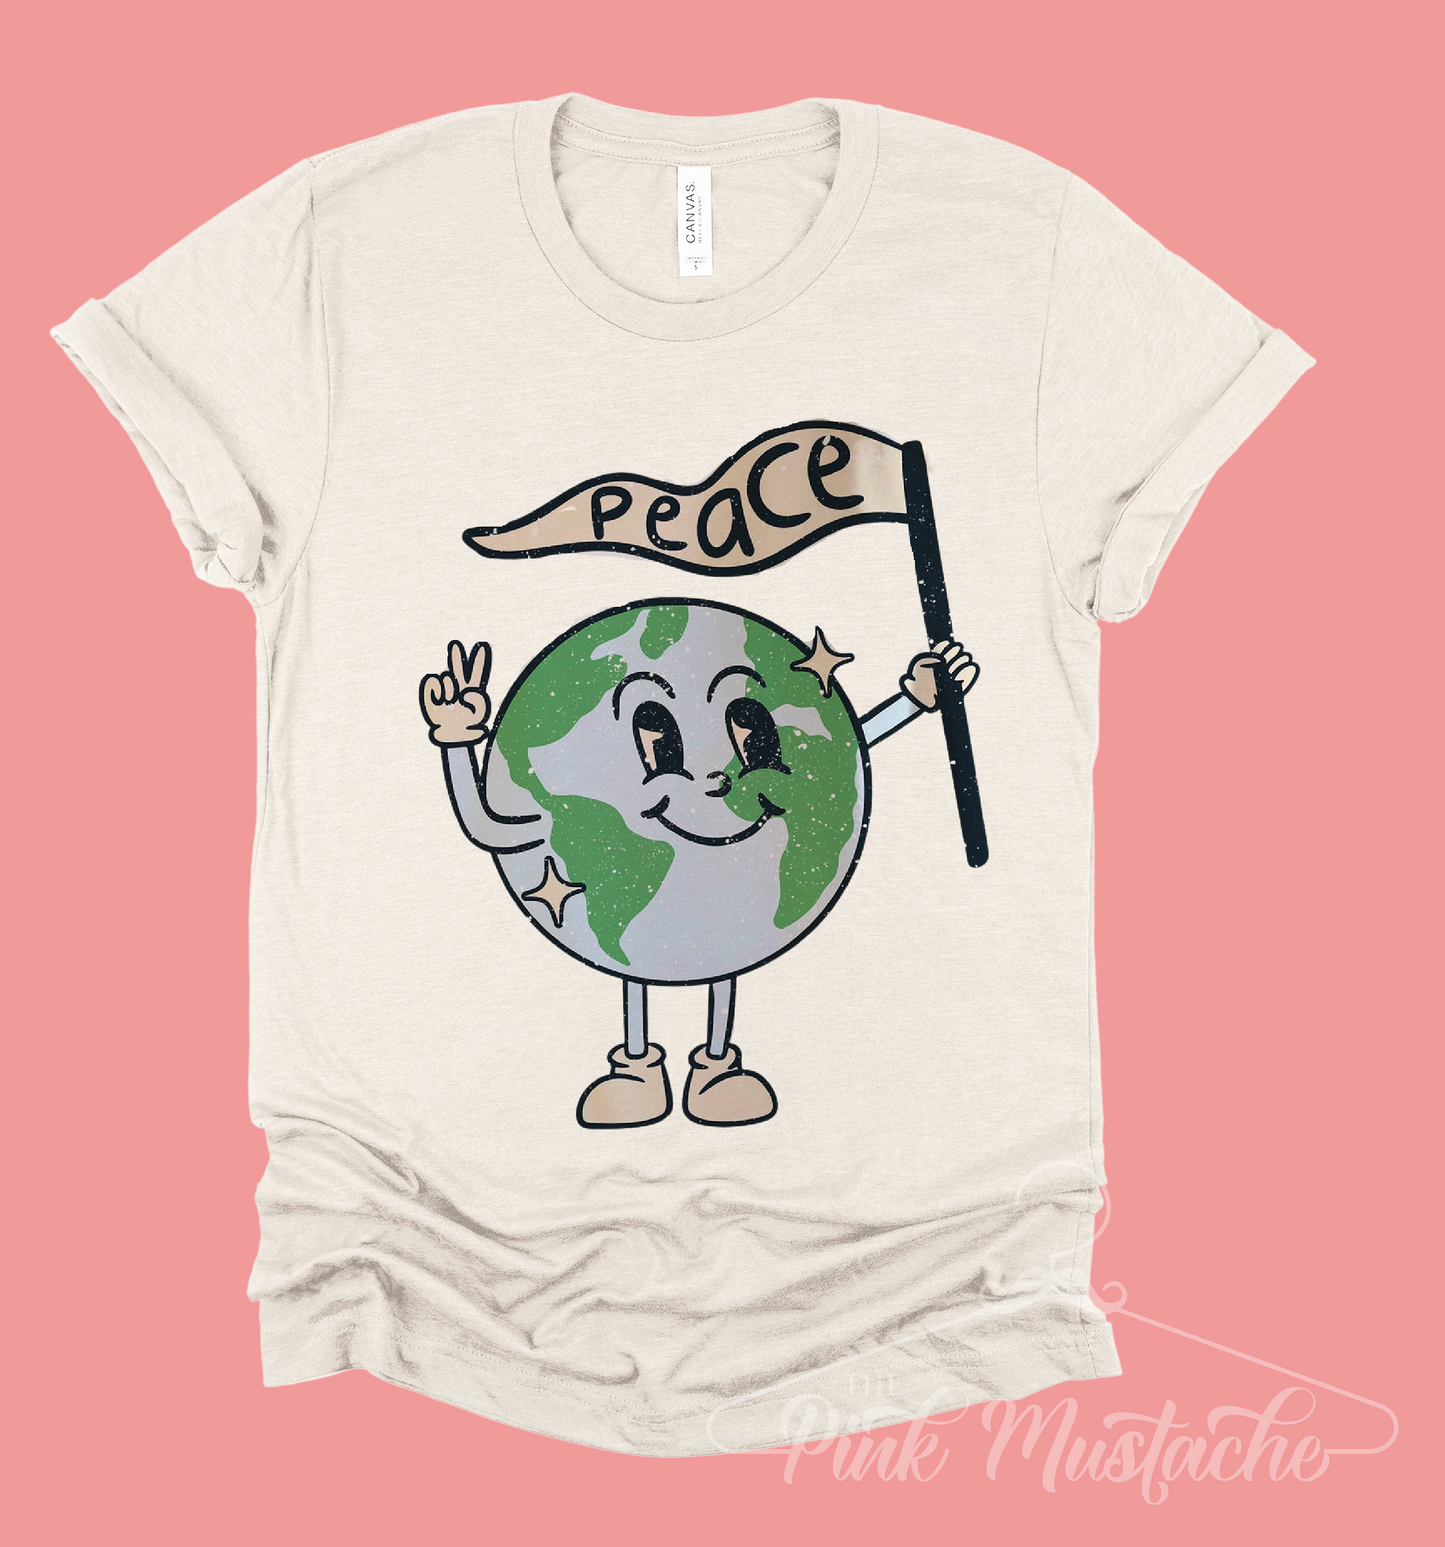 Peace On Earth Tee/ Toddler, Youth, and Adult Sizes Available/ Soft style Tee